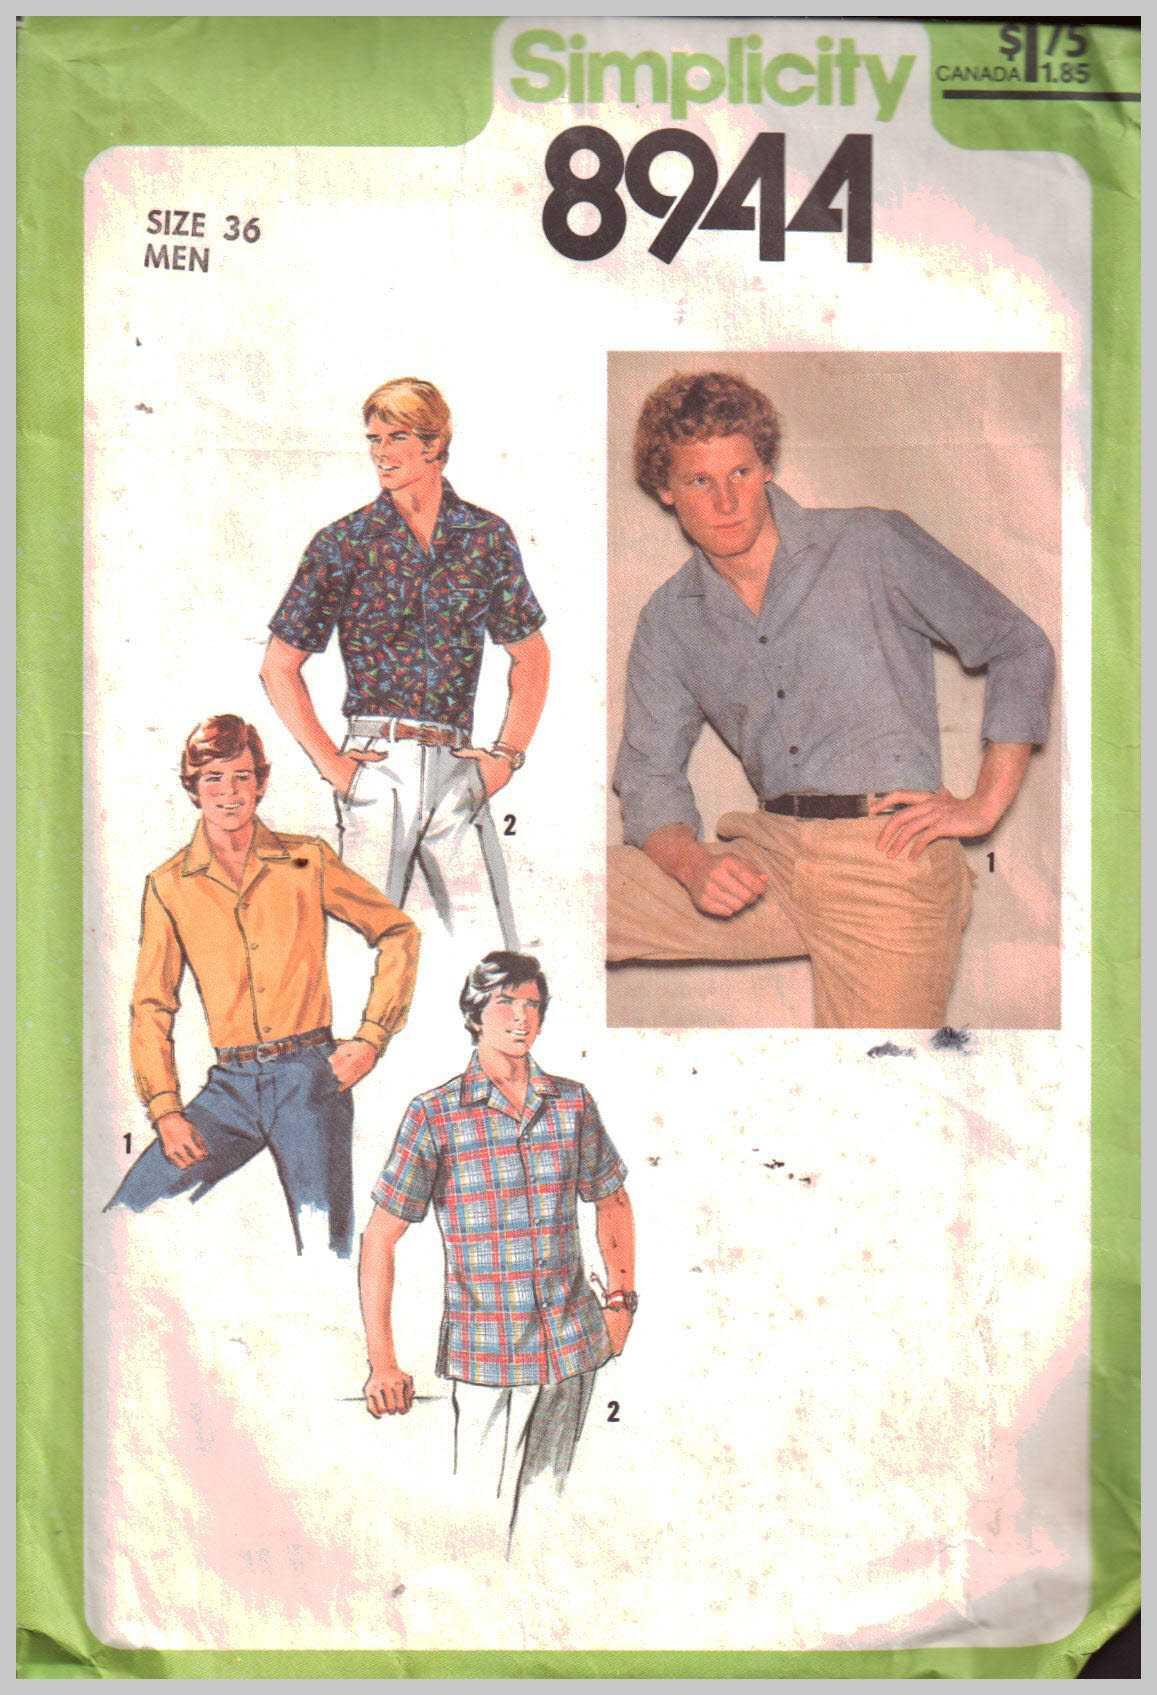 Simplicity 8944 Mens' Shirt Size: 36 Used Sewing Pattern